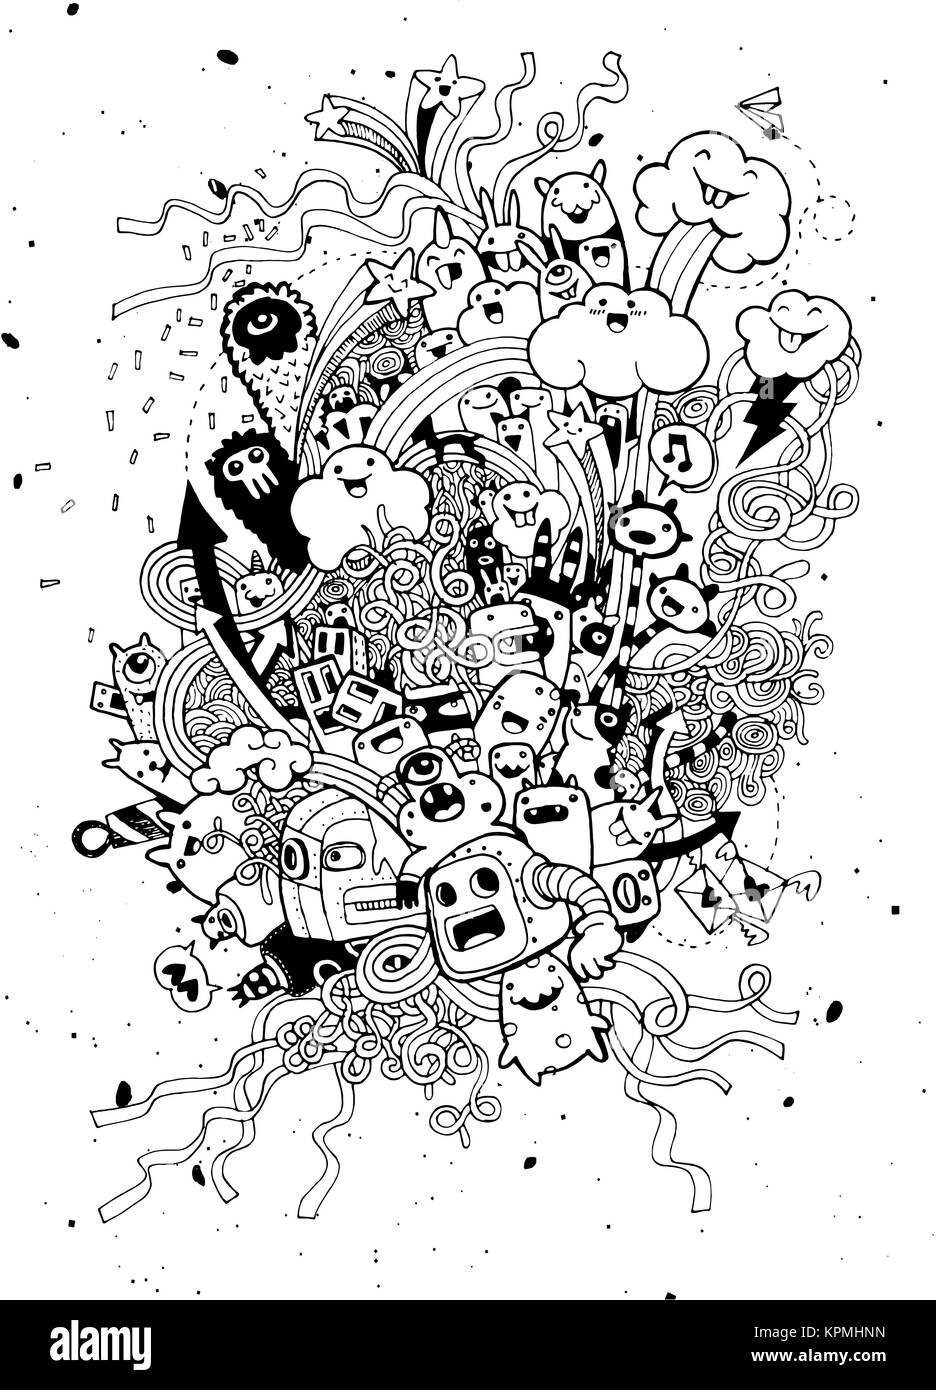 Hand Drawn of Monster party background Stock Photo